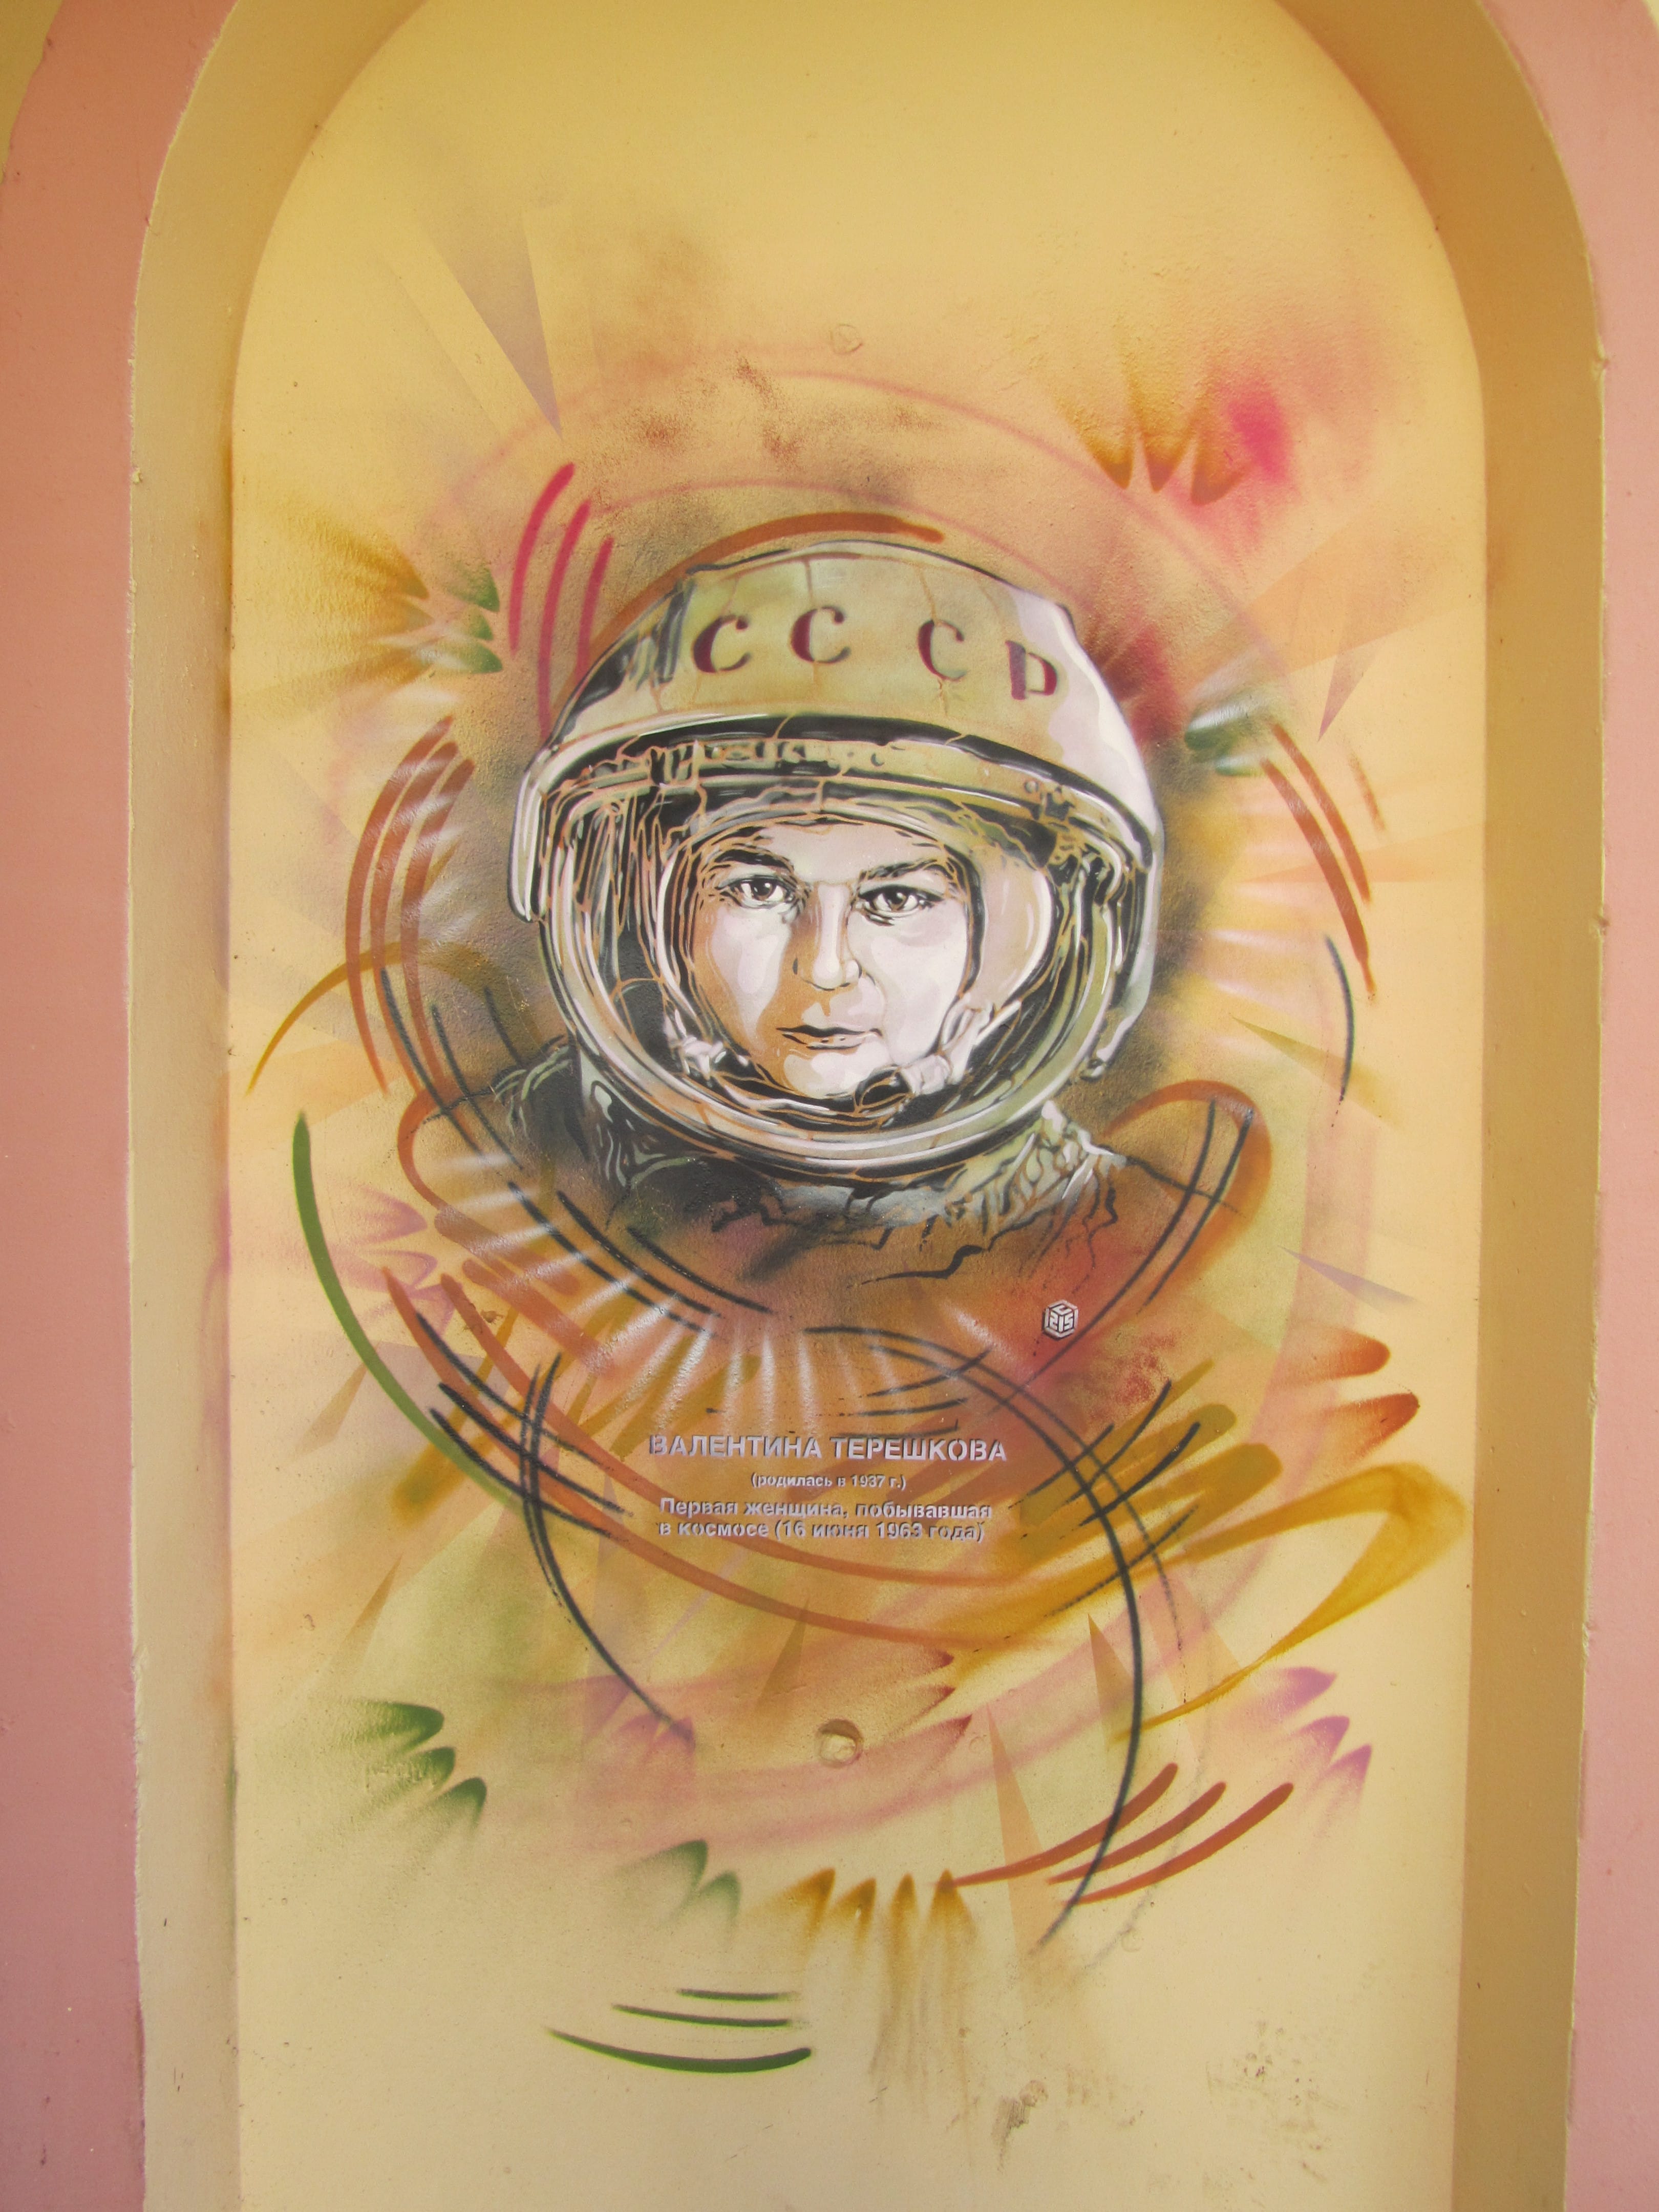 Graffiti 4638 First woman in Space by the artist C215 captured by elettrotajik in New Tryokhgorka Russia